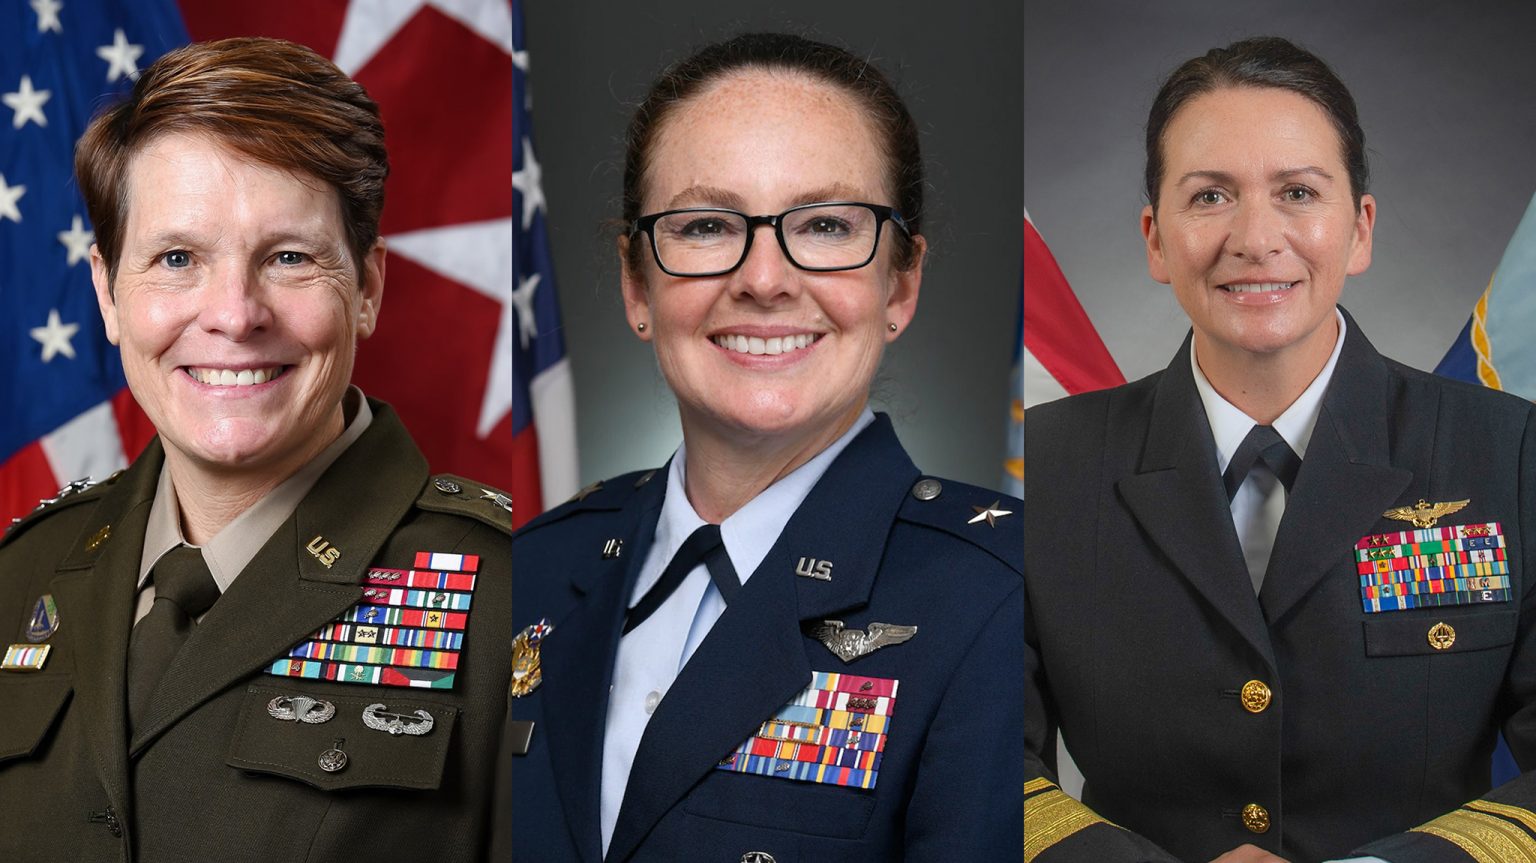 Lt. Gen. Maria R. Gervais (left), Brig. Gen. Stacy Jo Huser and Rear Adm. Nancy Lacore are set to speak Feb. 9 at the Gertrude C. Ford Center for the Performing Arts about their experience with diversity and inclusion as female leaders in the U.S. Army, Navy and Air Force. The session is part of a collaborative speaker series organized by the university’s Army ROTC and Trent Lott Leadership Institute. Submitted photos